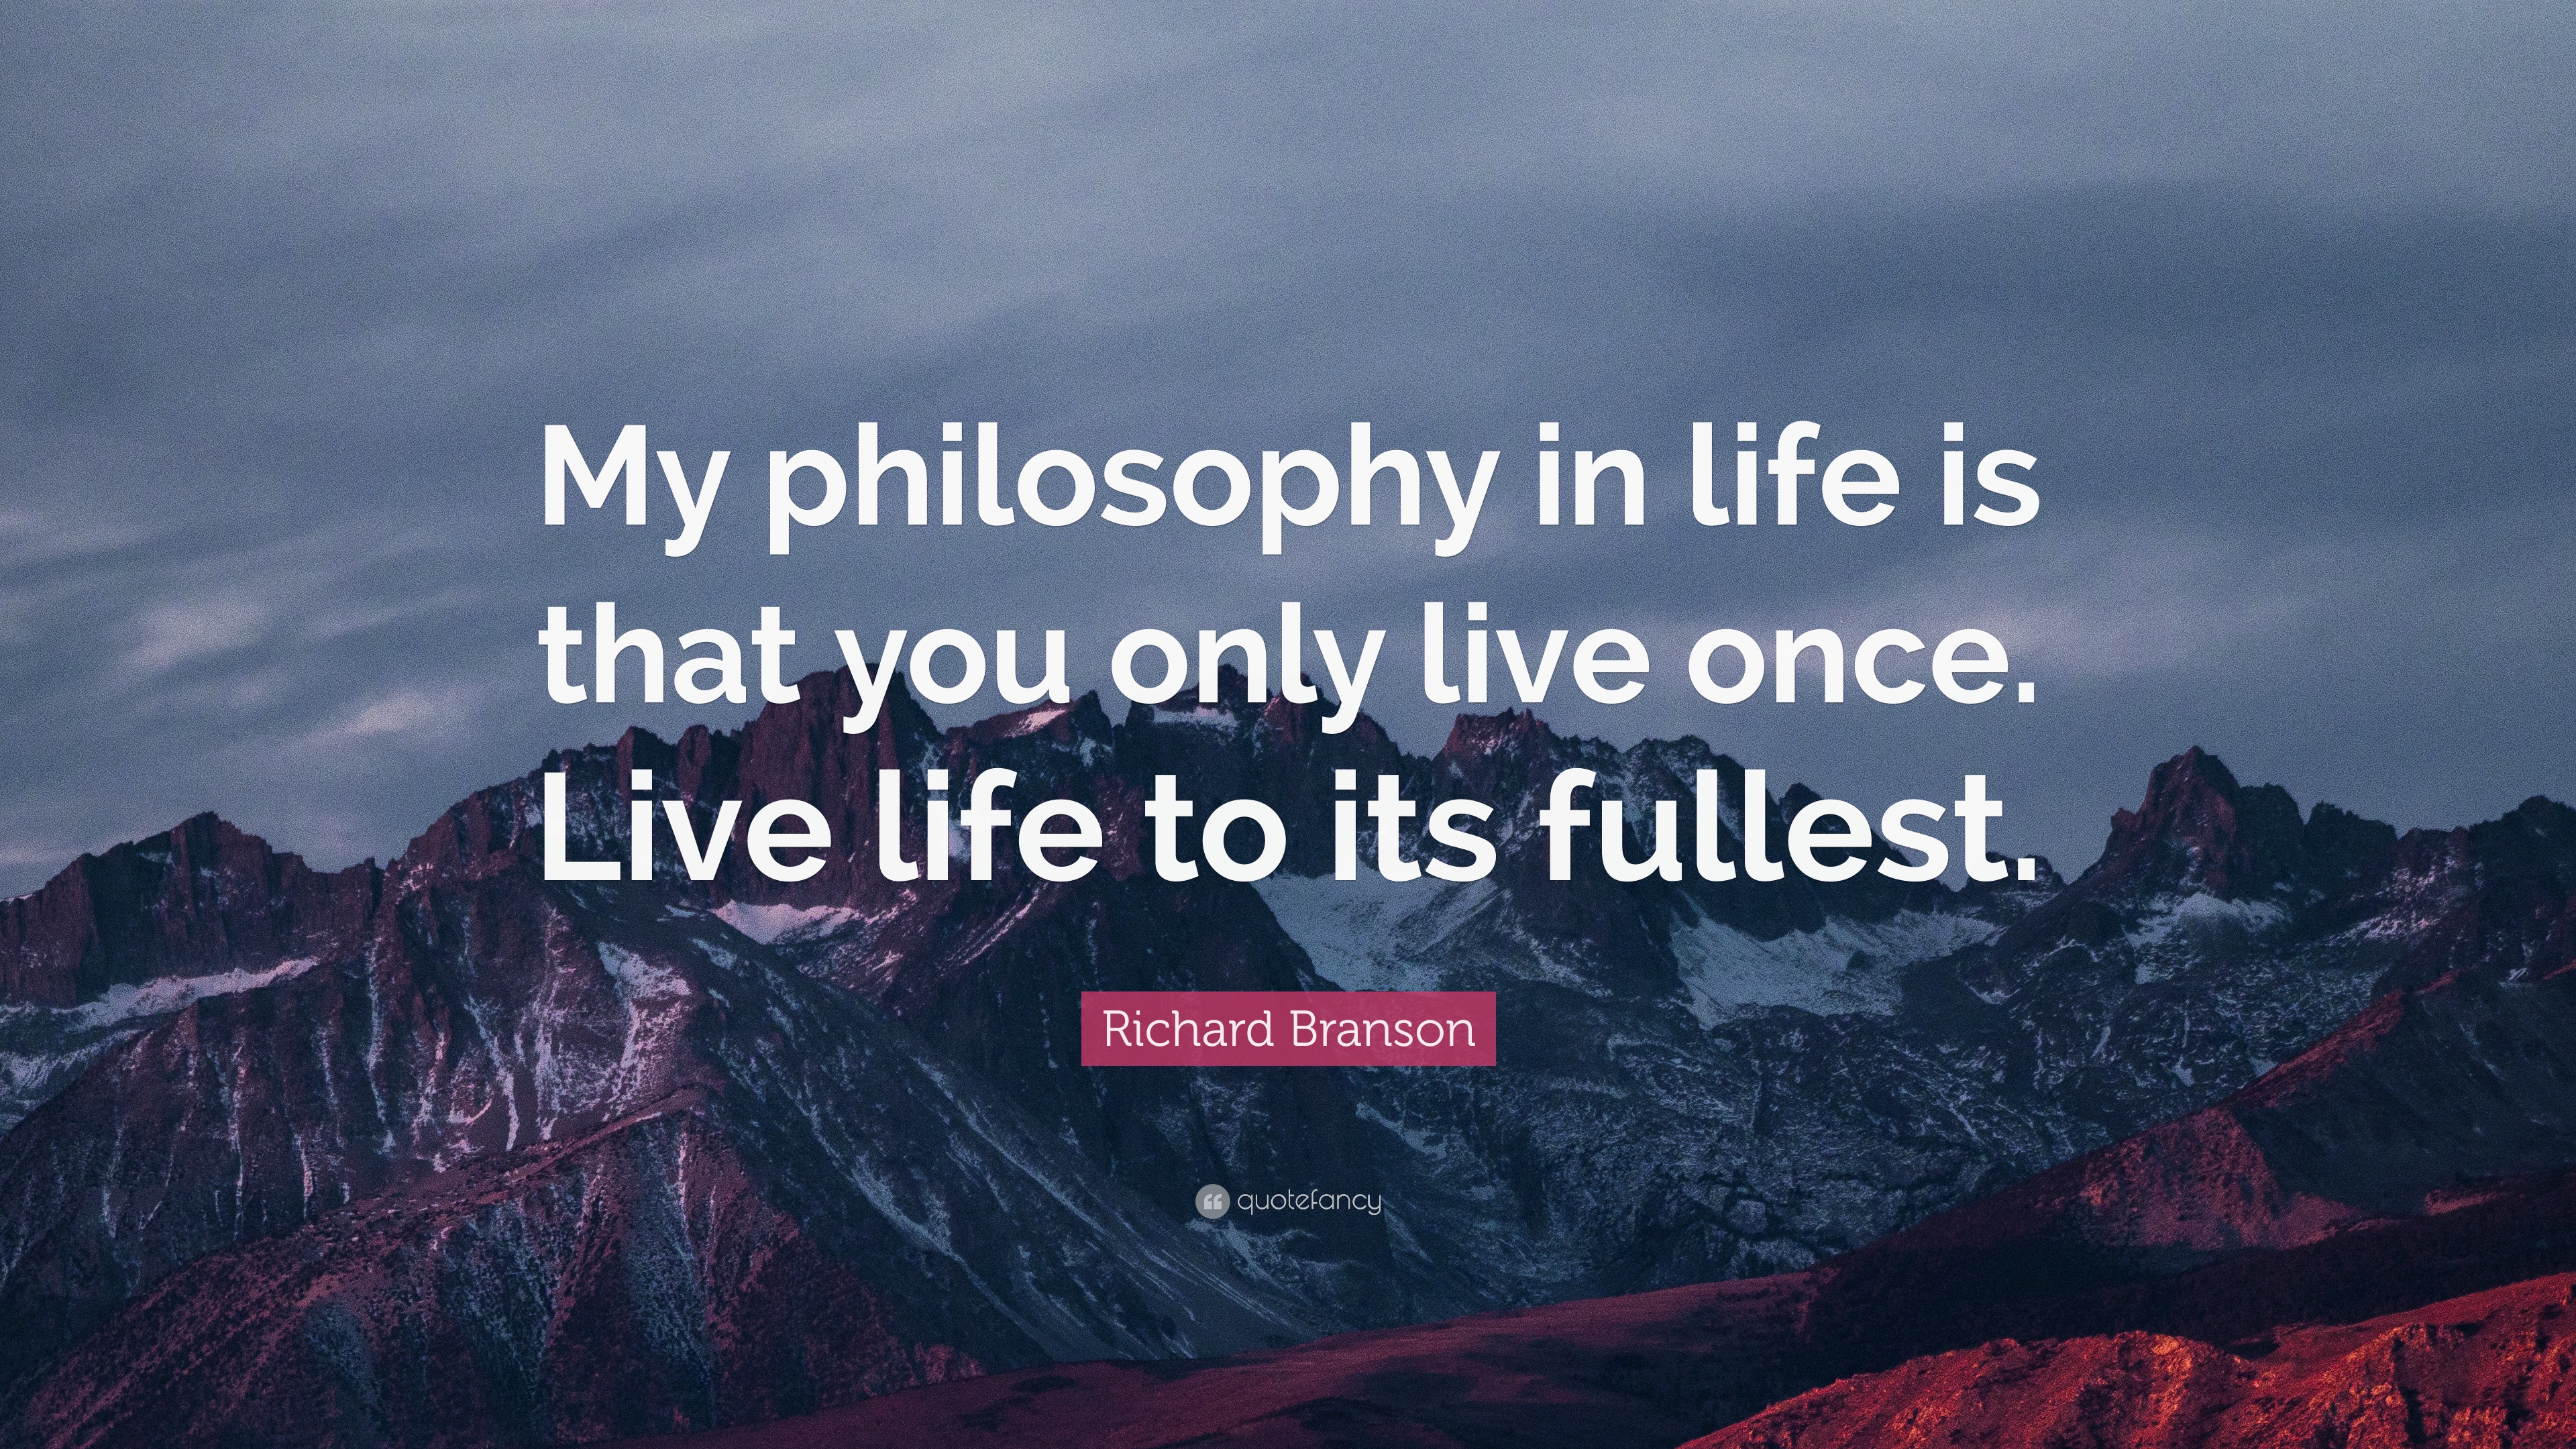 Richard Branson Quote: “My philosophy in life is that you only live ...